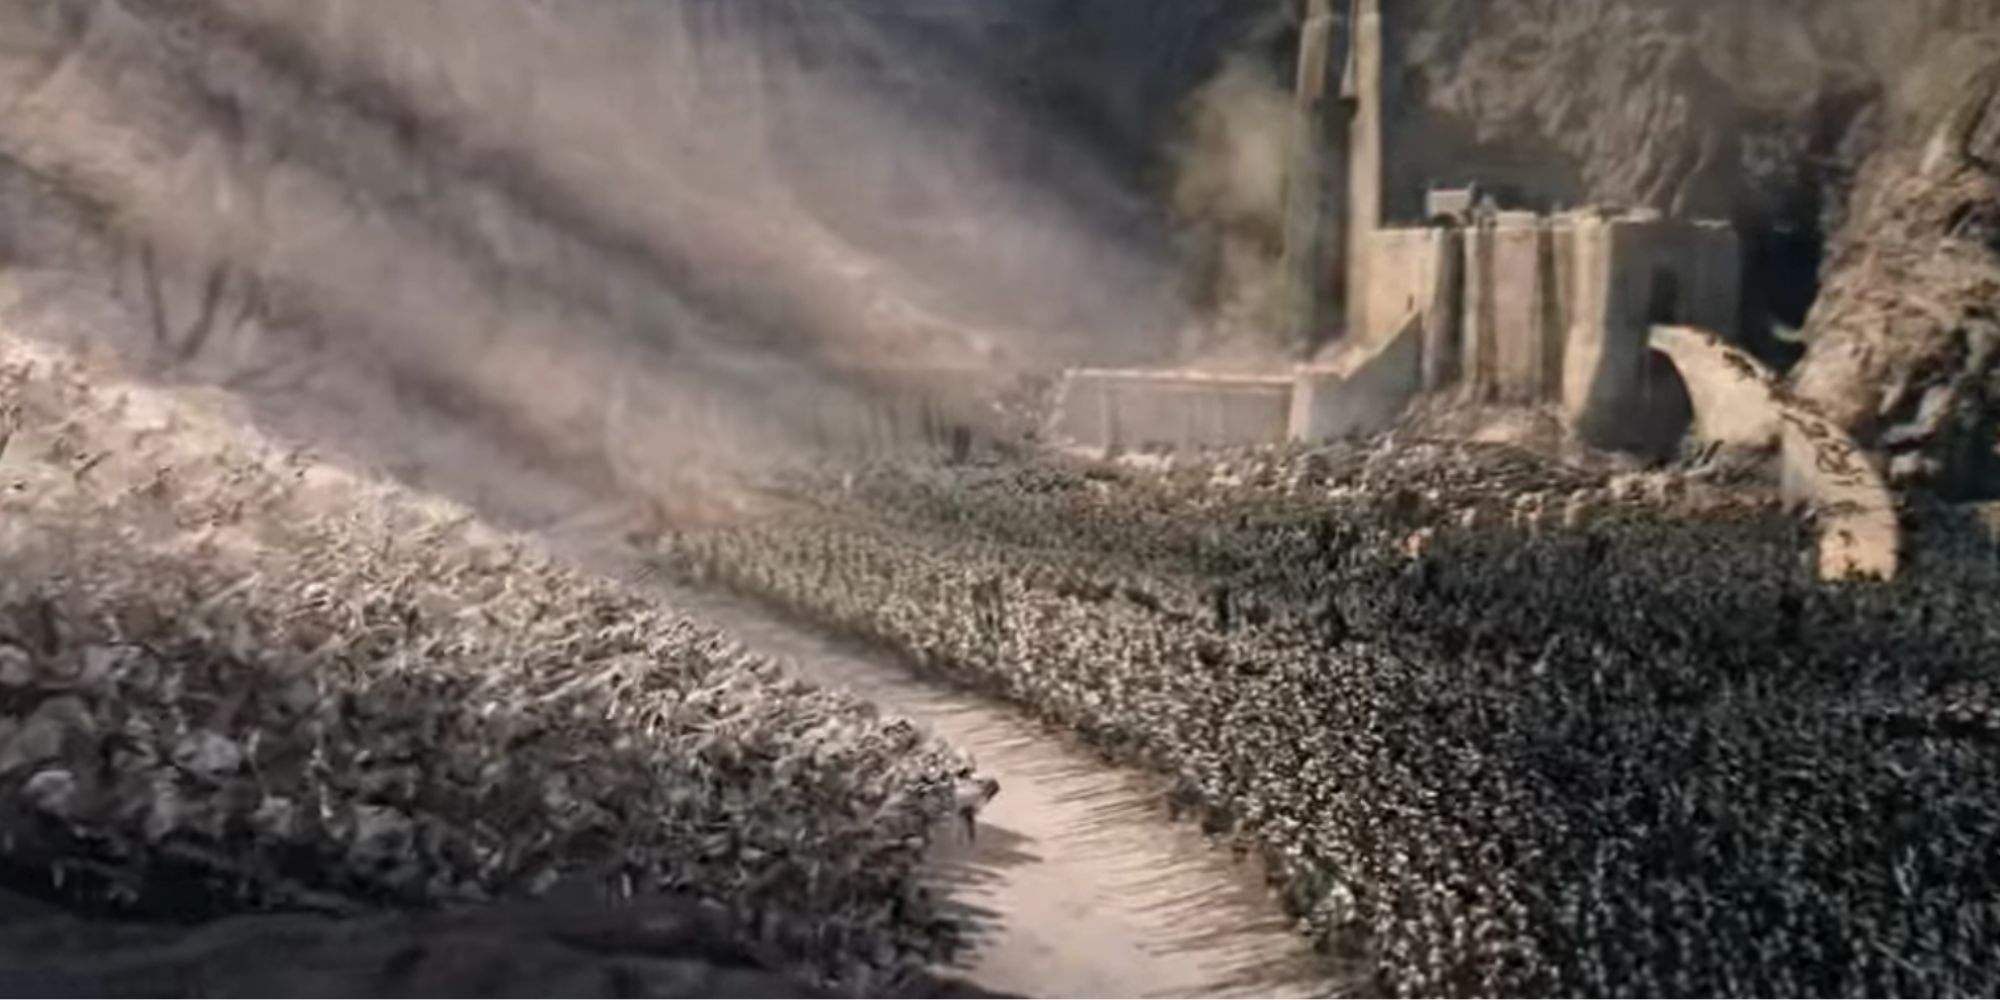 Gandalf's reinforcements arrive and flank the orcs from behind